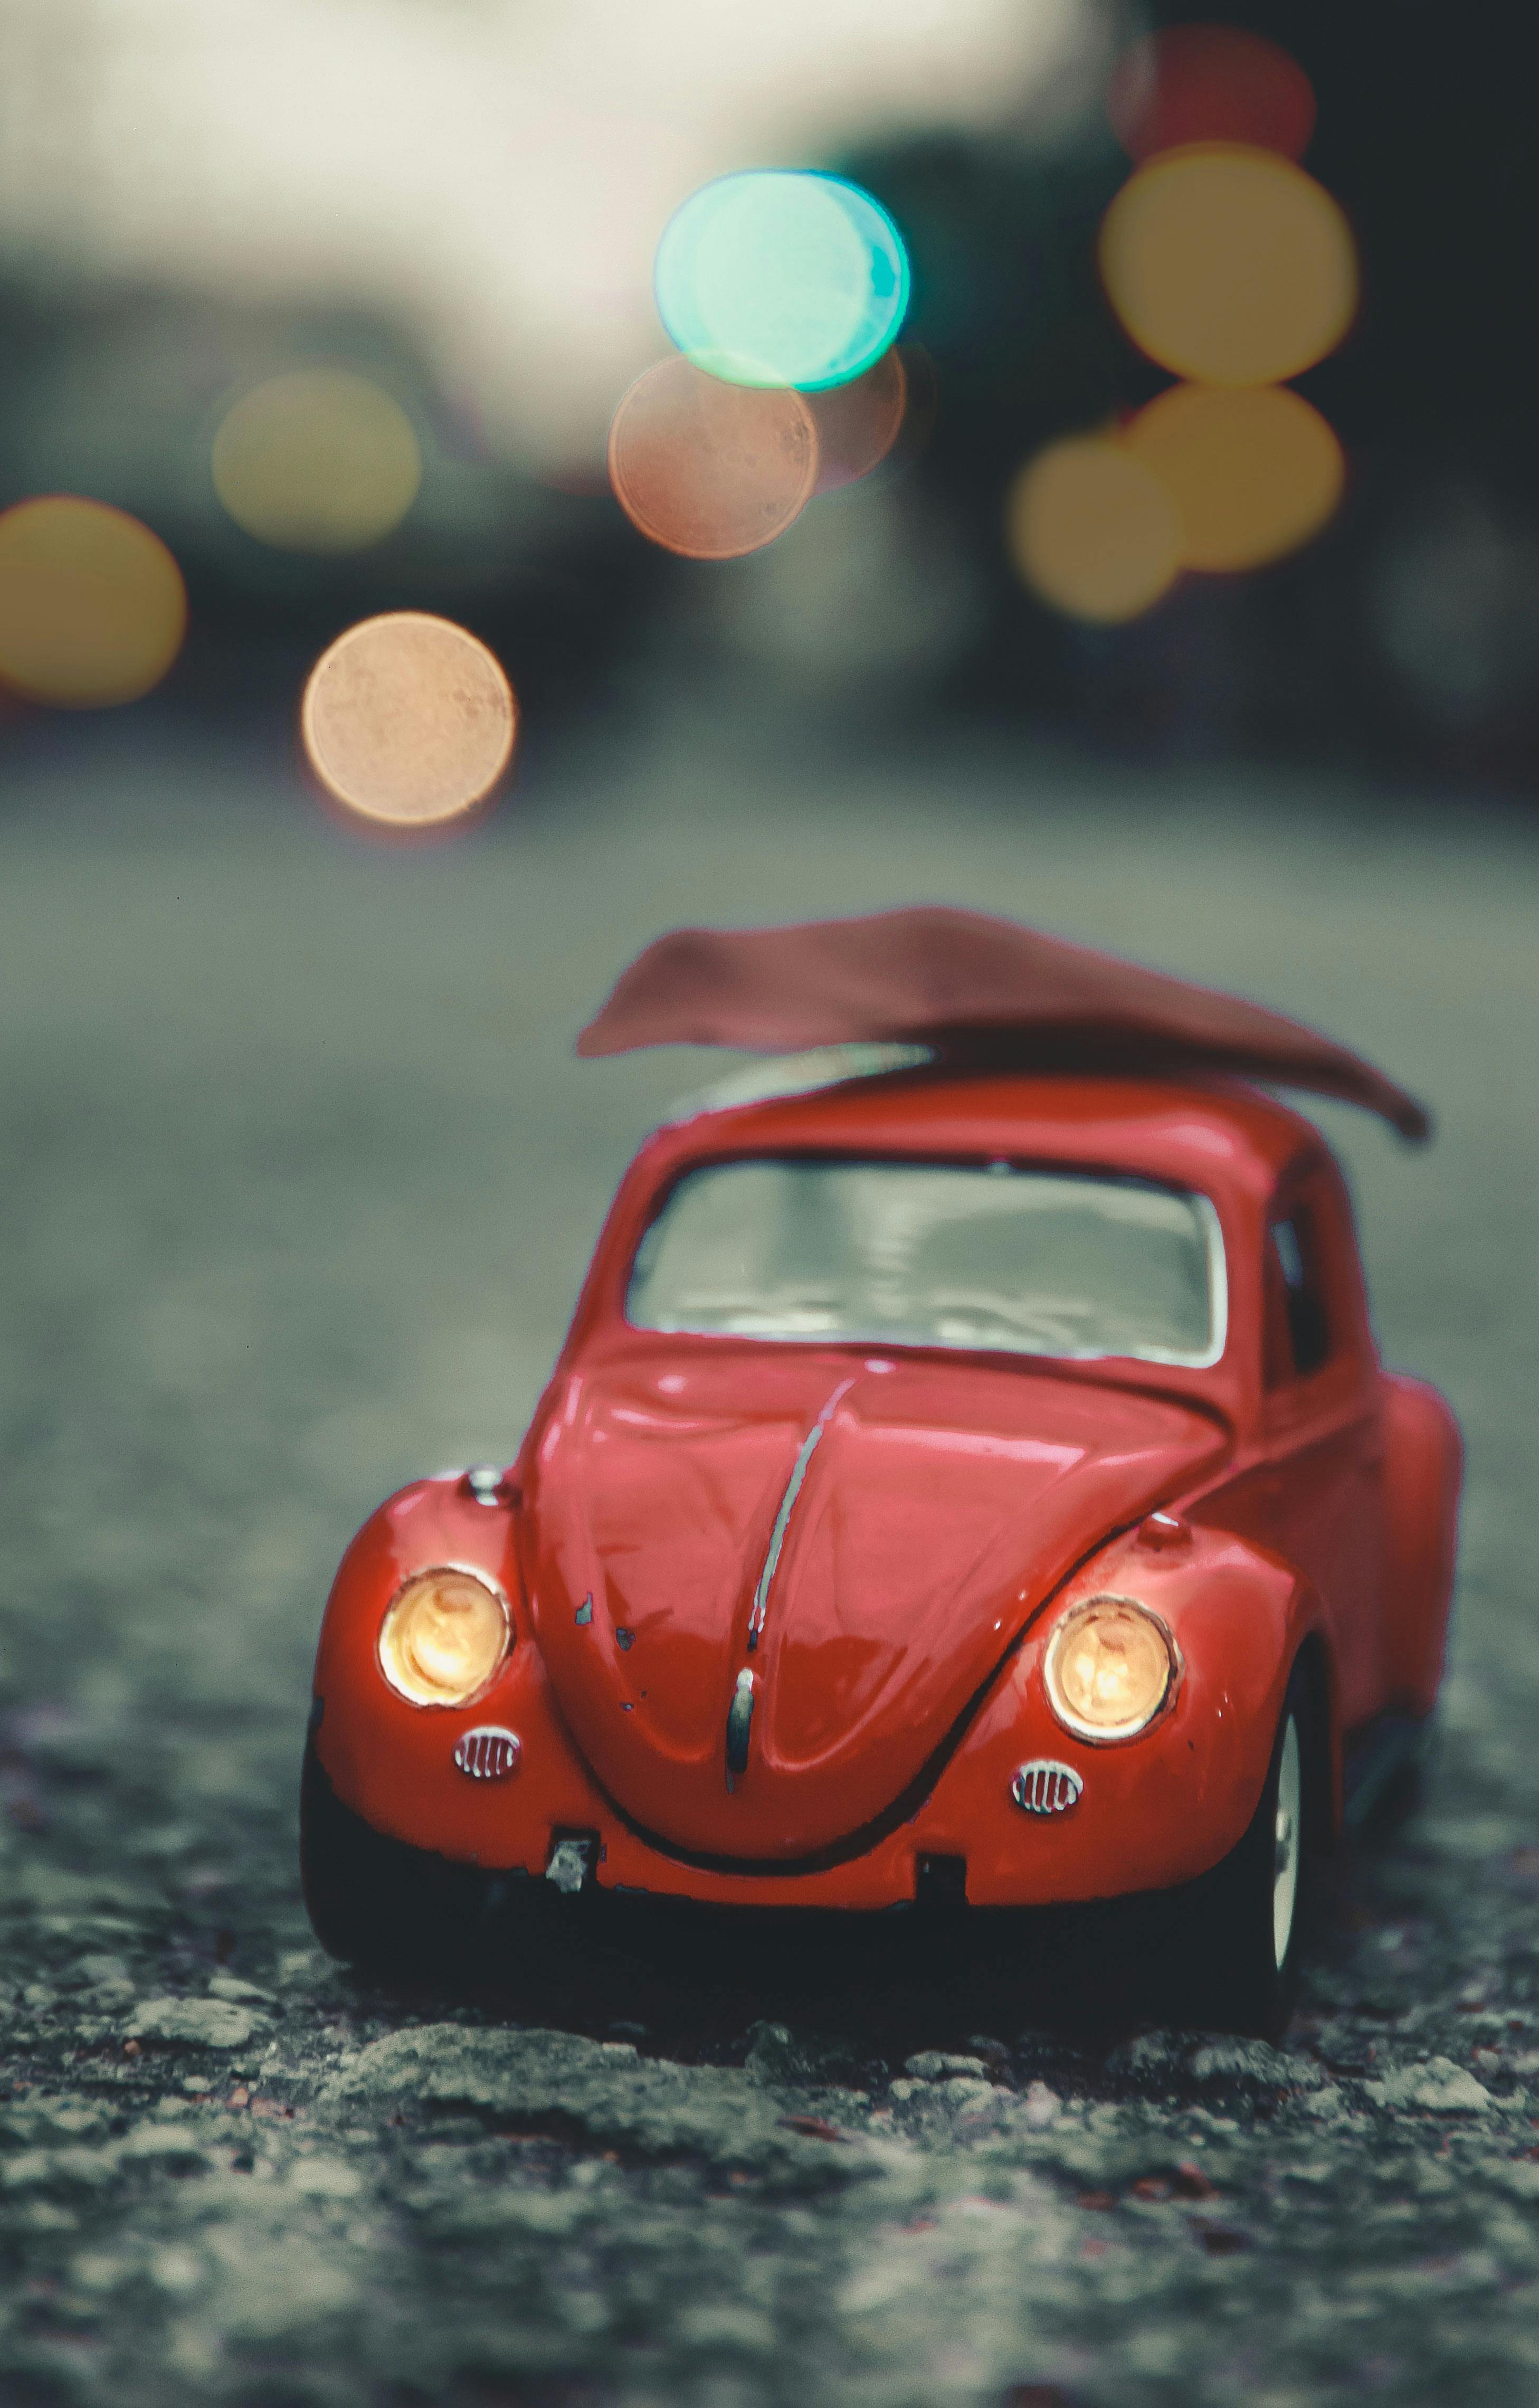 Wallpaper Red Volkswagen Beetle on Road During Daytime Background   Download Free Image